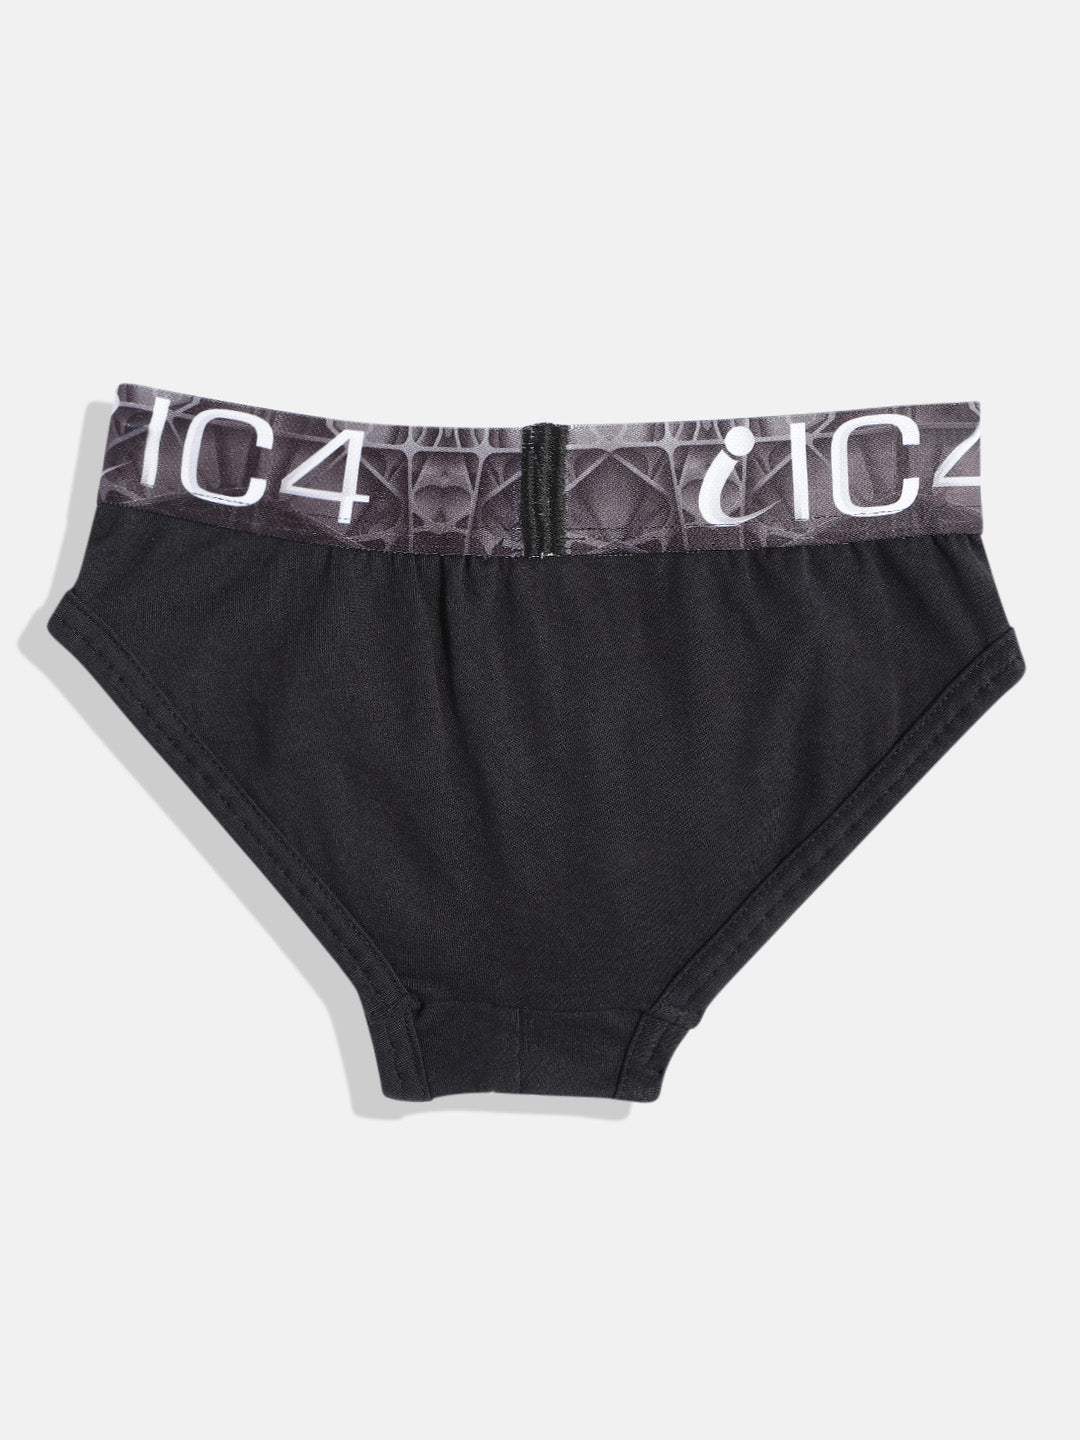 IC4 Boys Fashion Brief Combo Pack of 2 Black